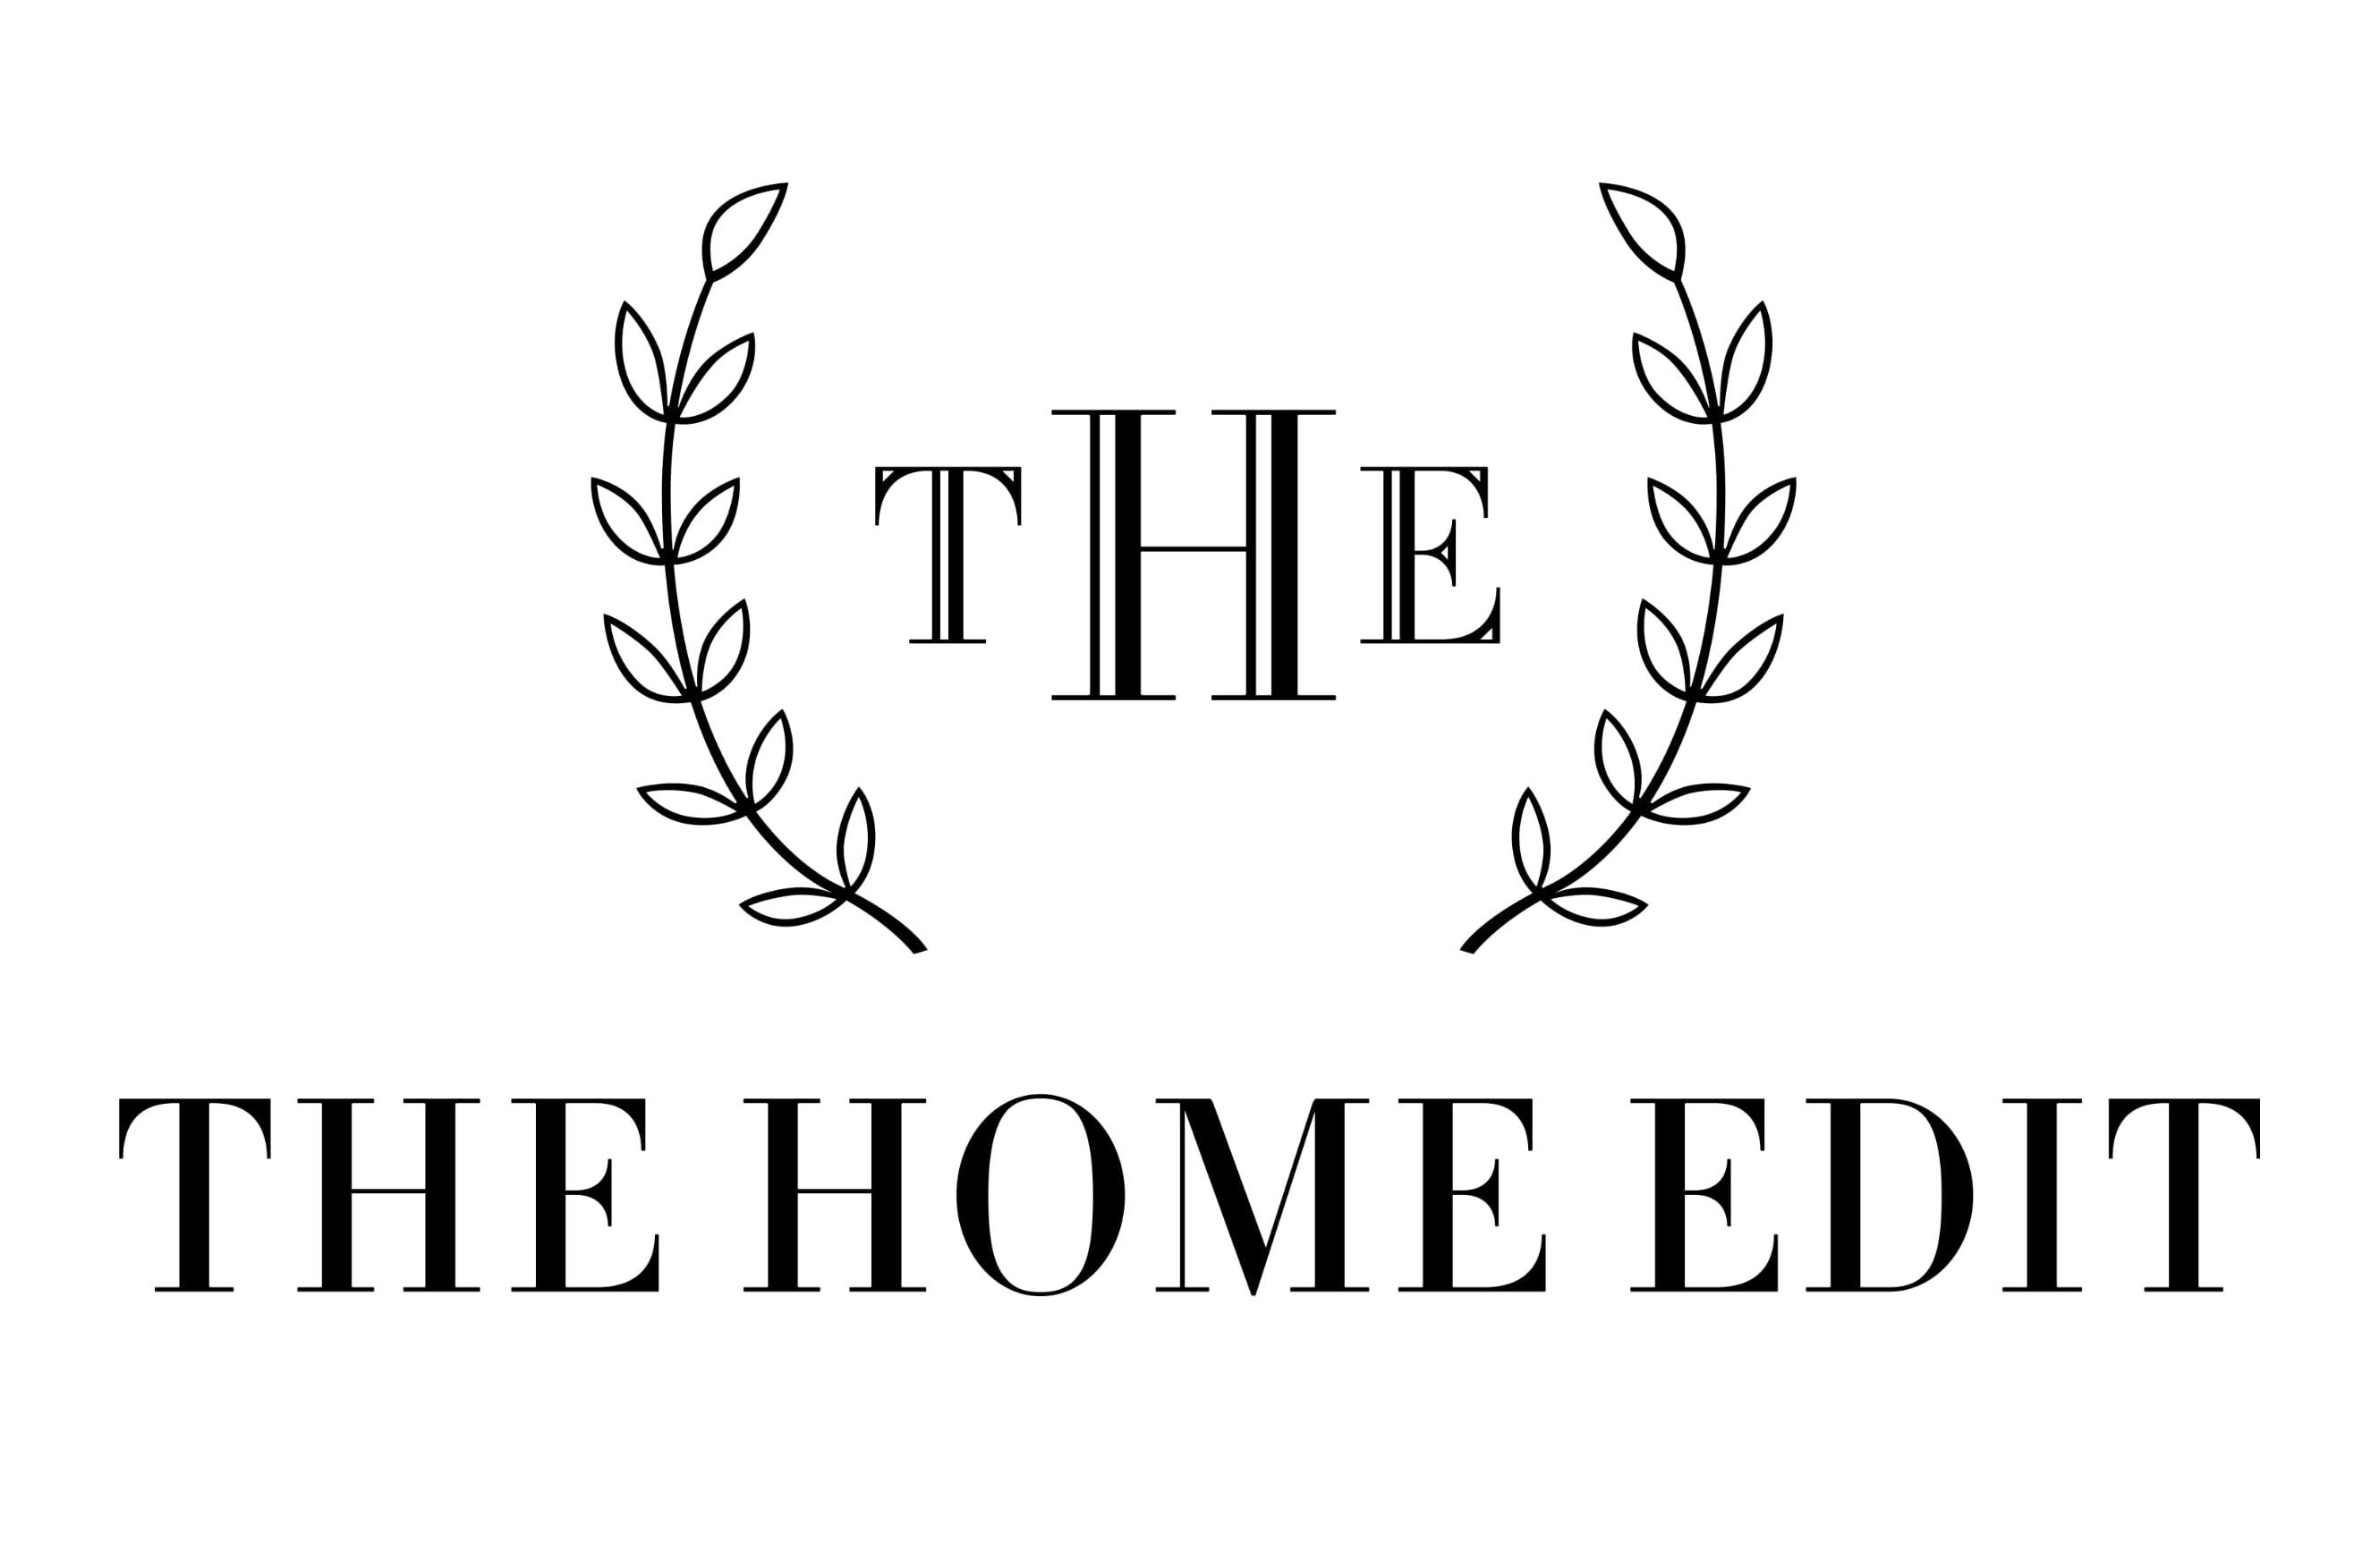 The Home edit